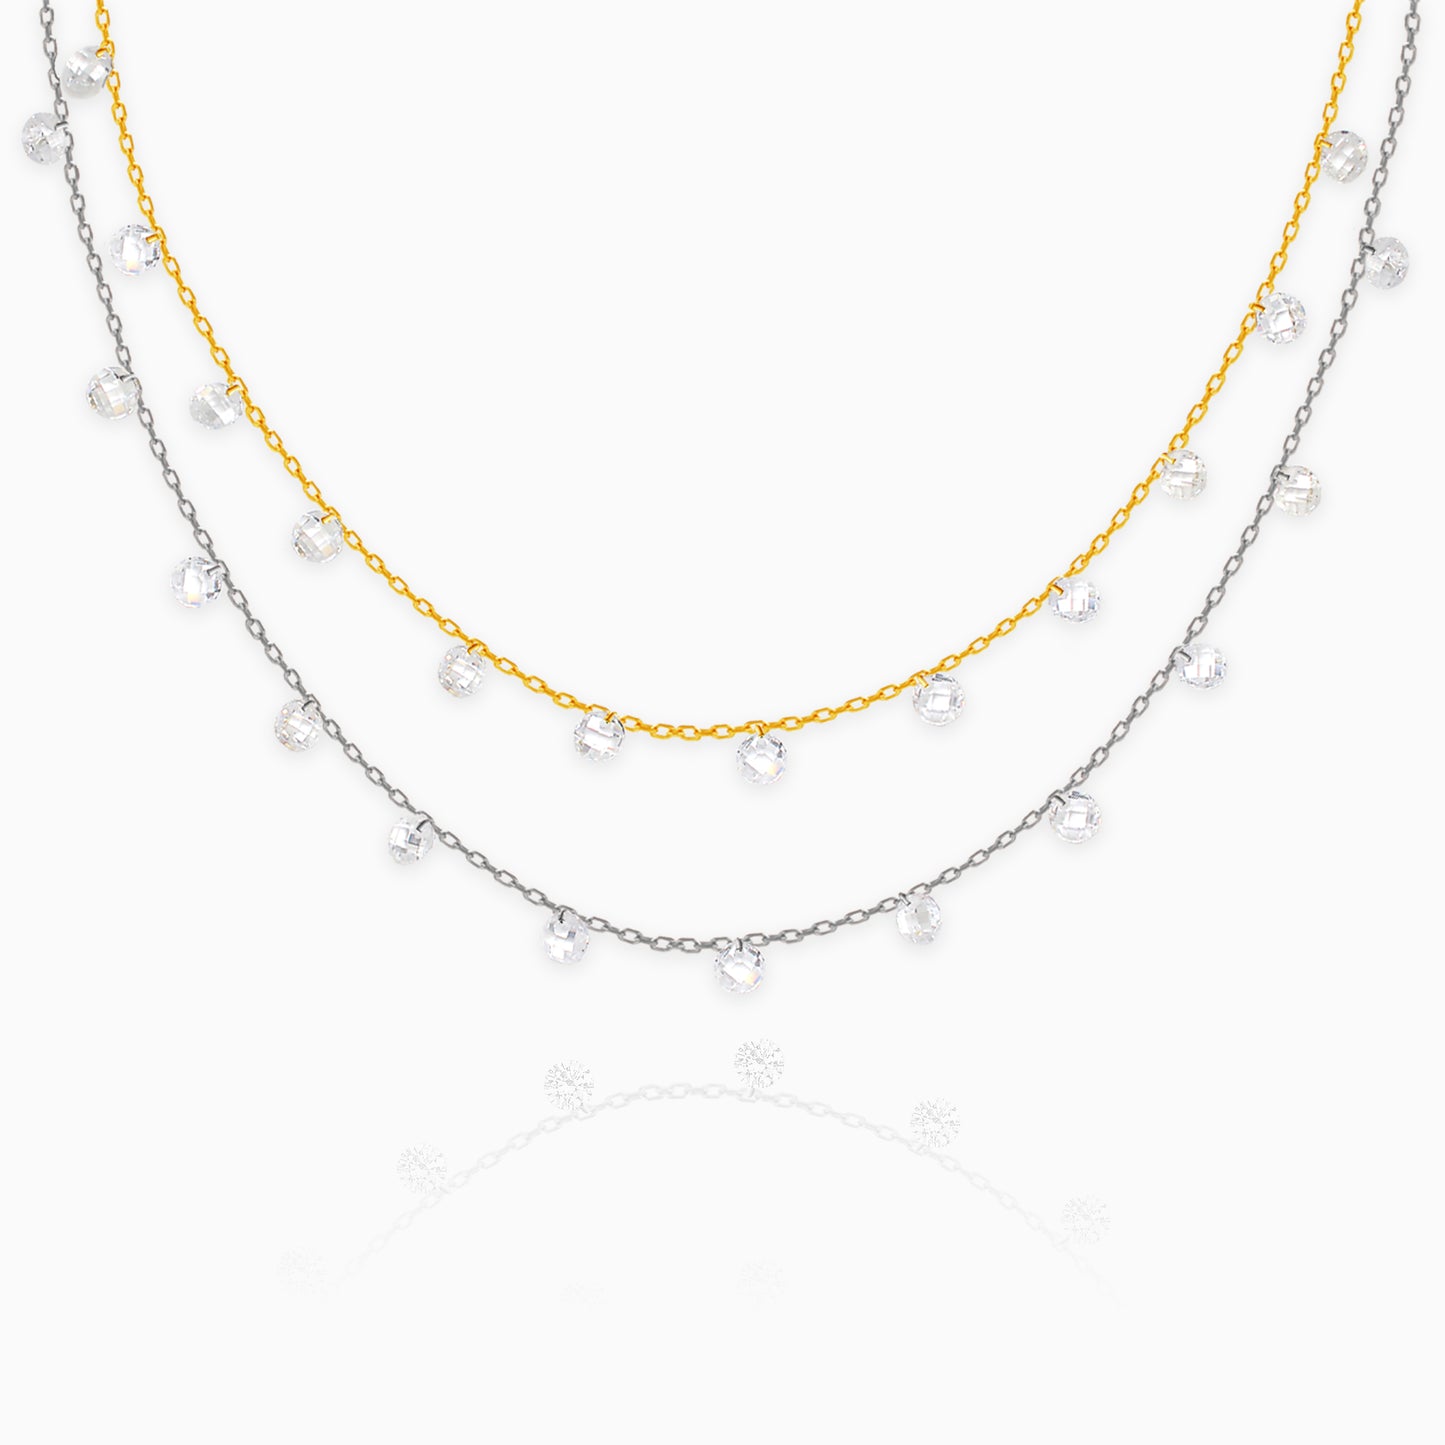 Silver Gold Layered Queens Necklace